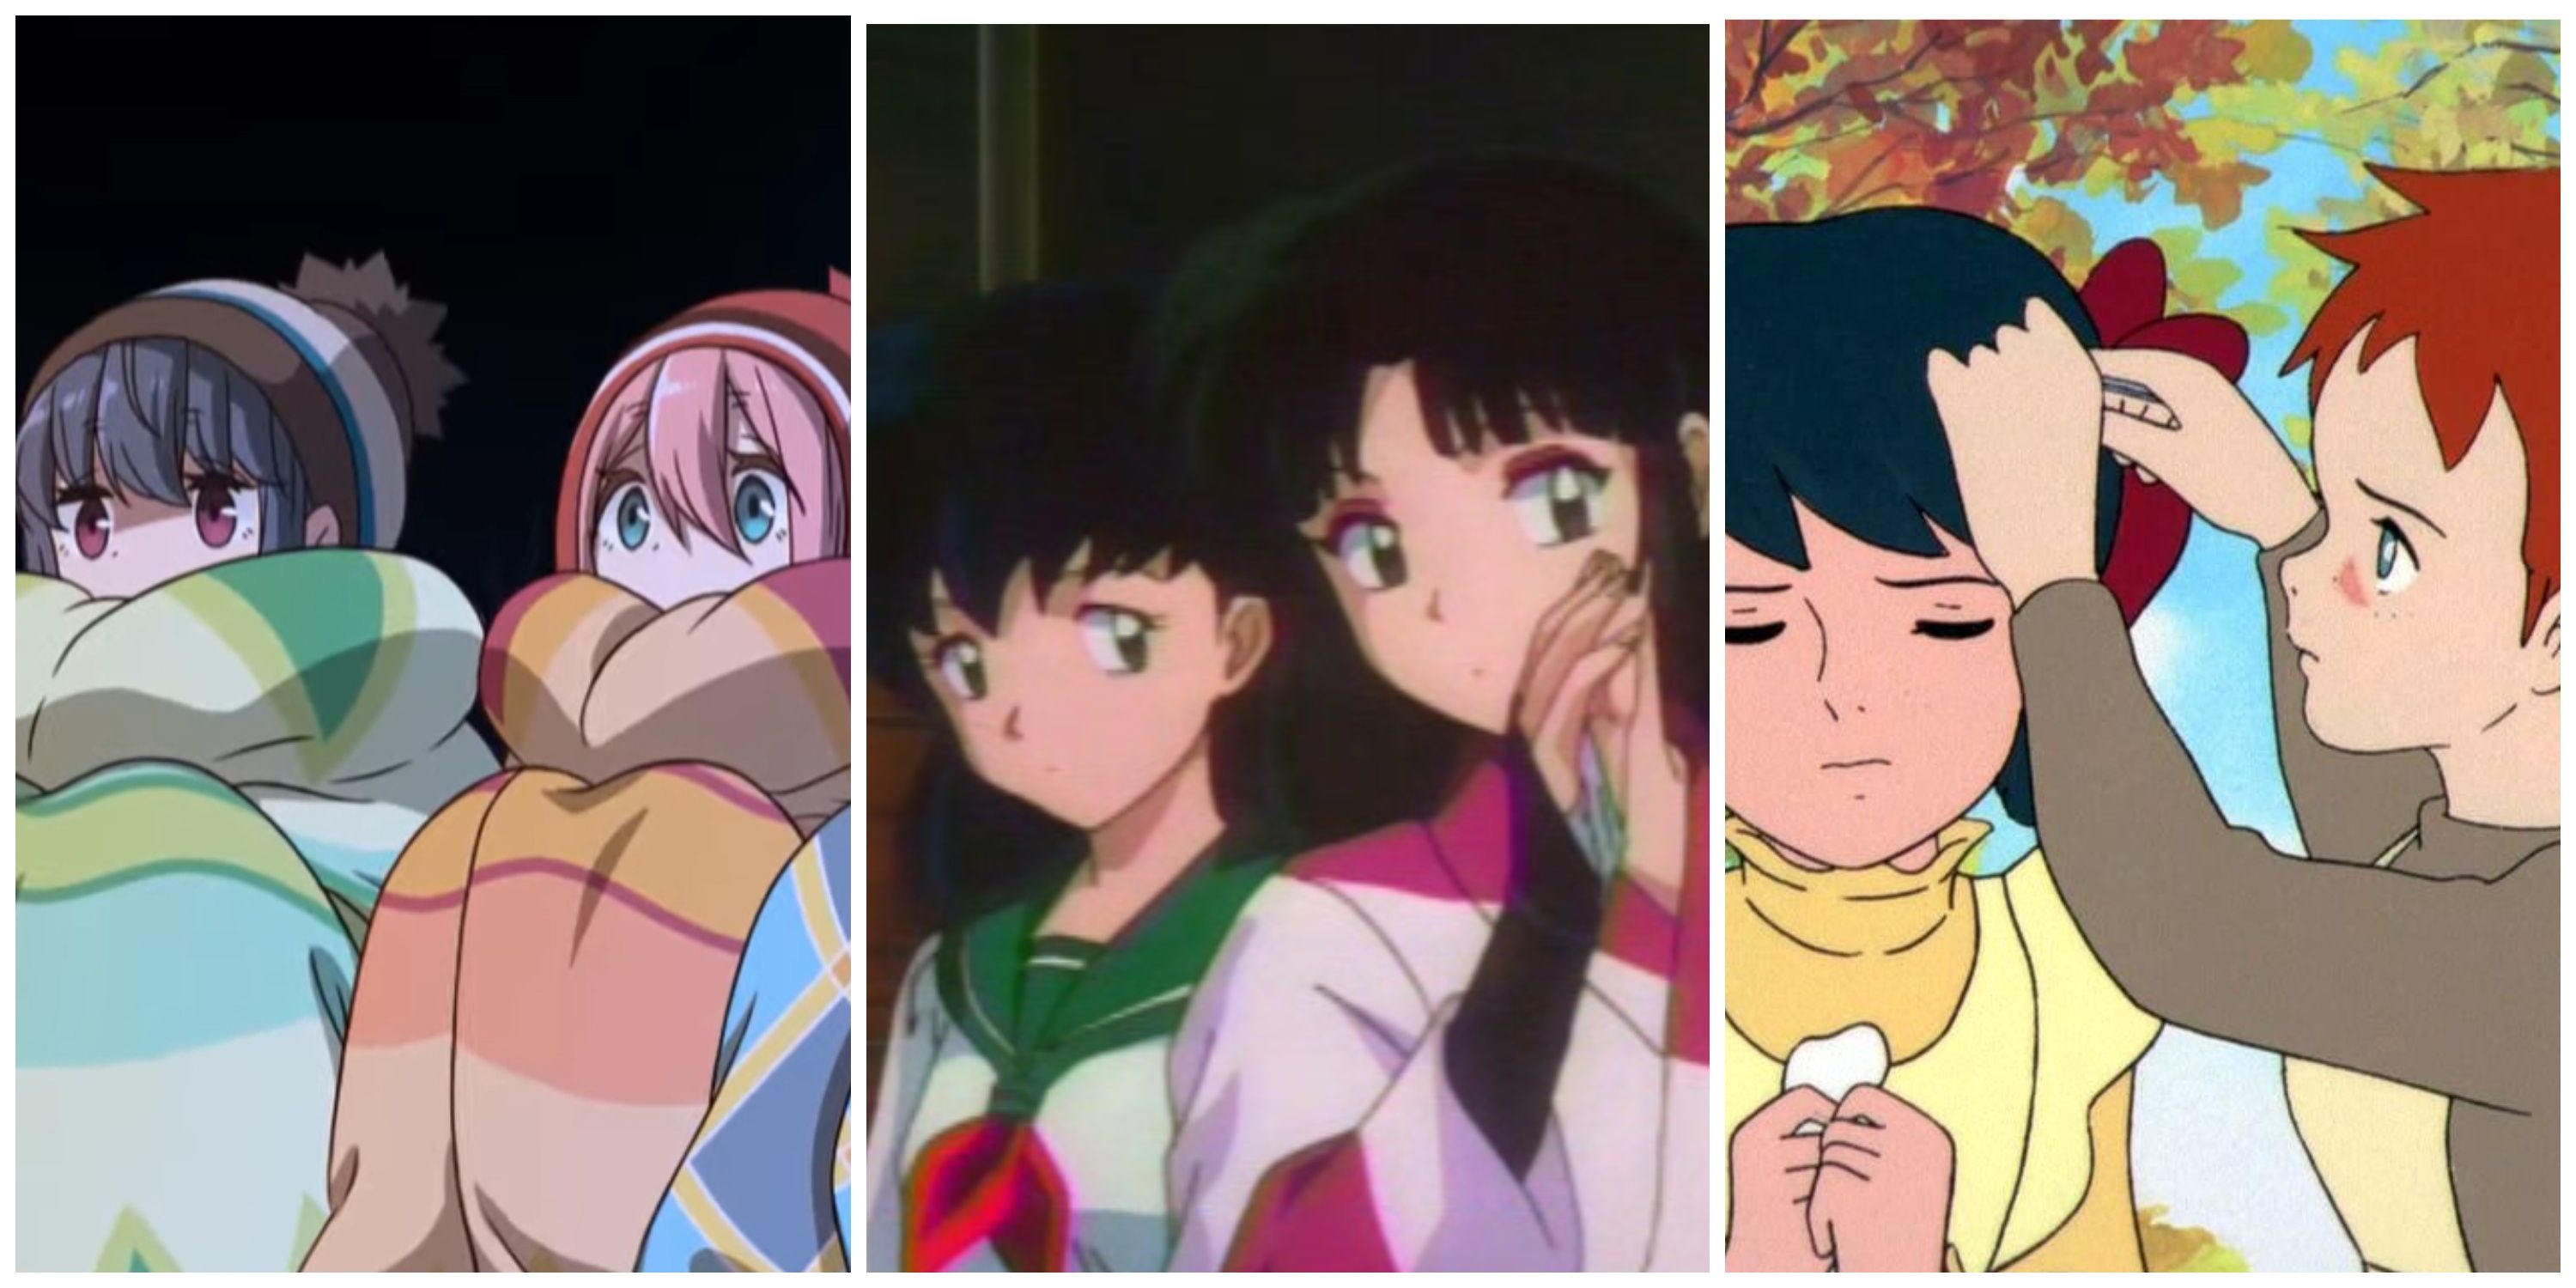 Split image, Rin and Nadeshiko camping with their club in Laid-Back Camp, Sango whispering to Kagome in InuYasha, Anne fixing Diana's hair in Anne of Green Gables.